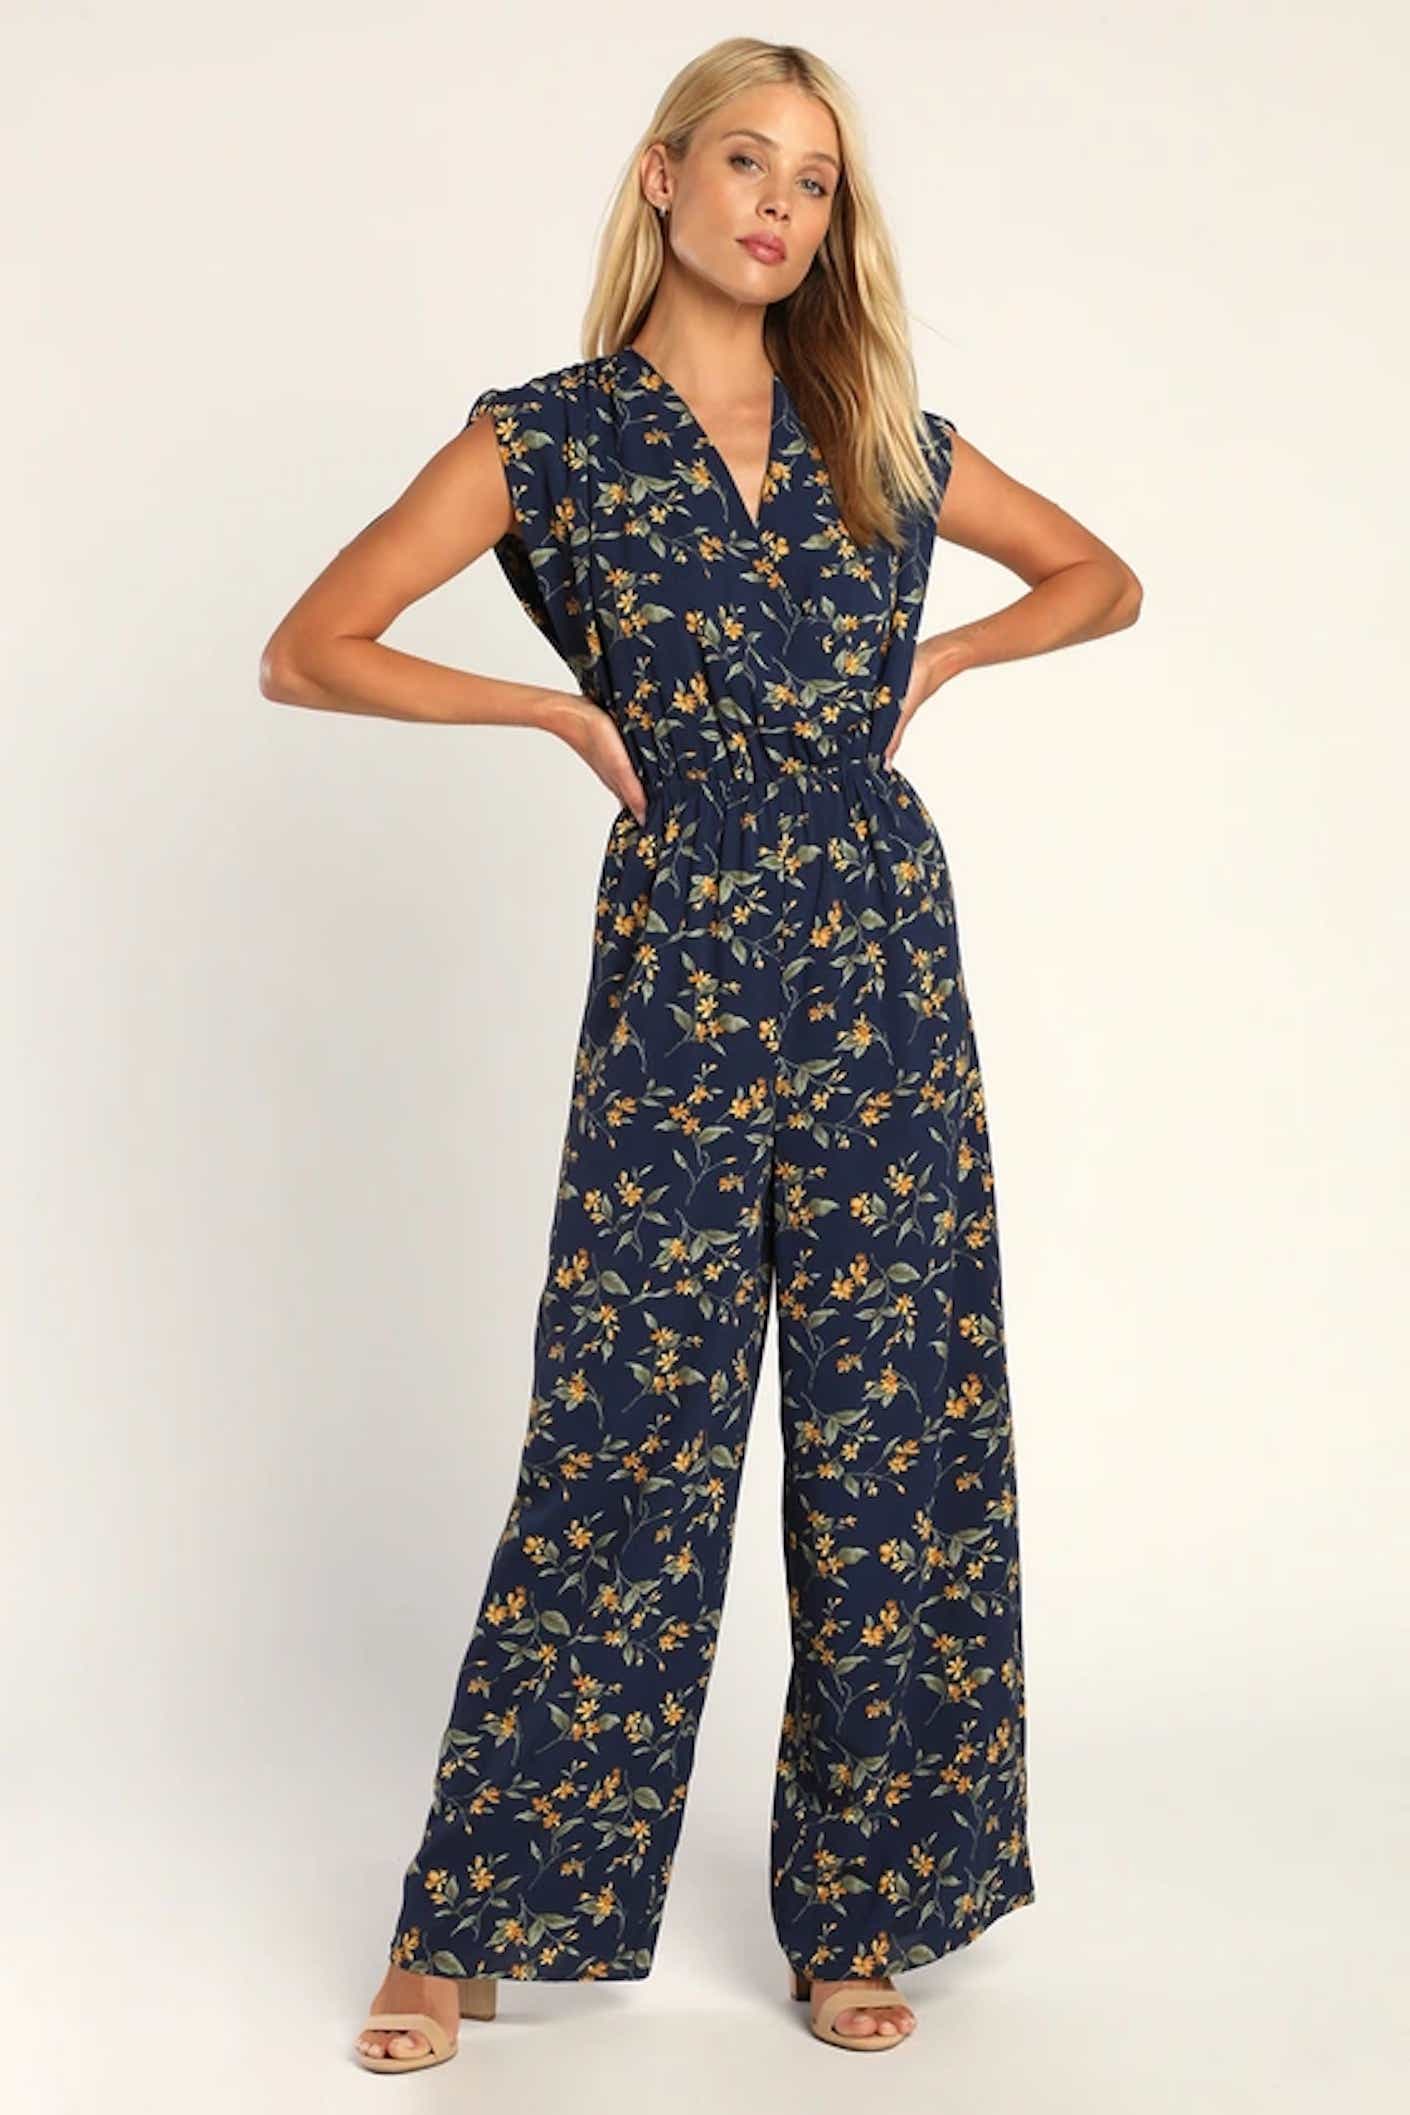 A woman poses with her hands on her hips in a long, flowy, flutter sleeved jumpsuit that is black and covered in a small floral pattern.